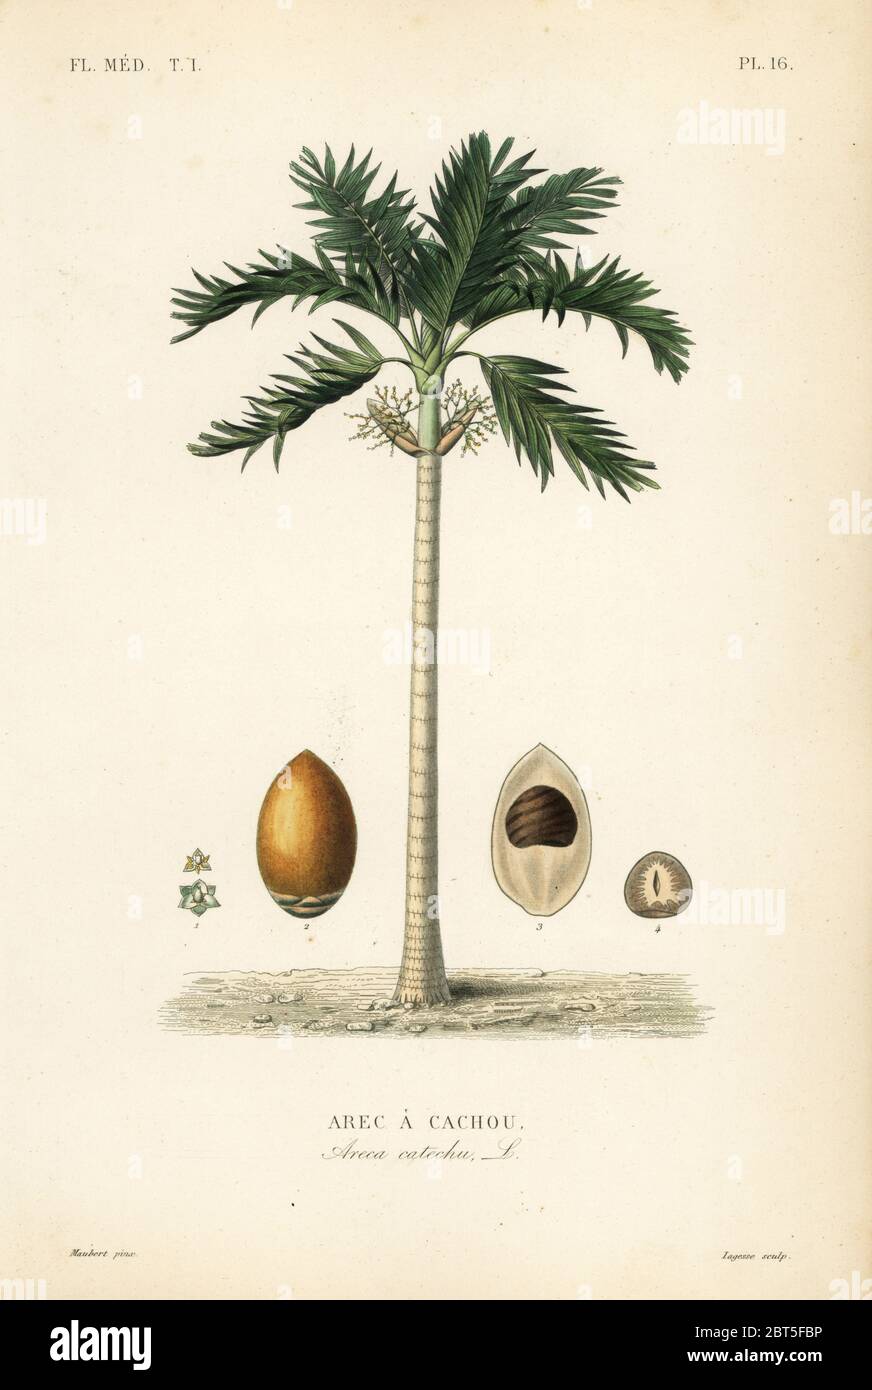 Areca nut palm tree, Areca catechu, Arec a cachou. Handcoloured steel engraving by Lagesse after a botanical illustration by Edouard Maubert from Pierre Oscar Reveil, A. Dupuis, Fr. Gerard and Francois Herincqs La Regne Vegetal: Flore Medicale, L. Guerin, Paris, 1864-1871. Stock Photo